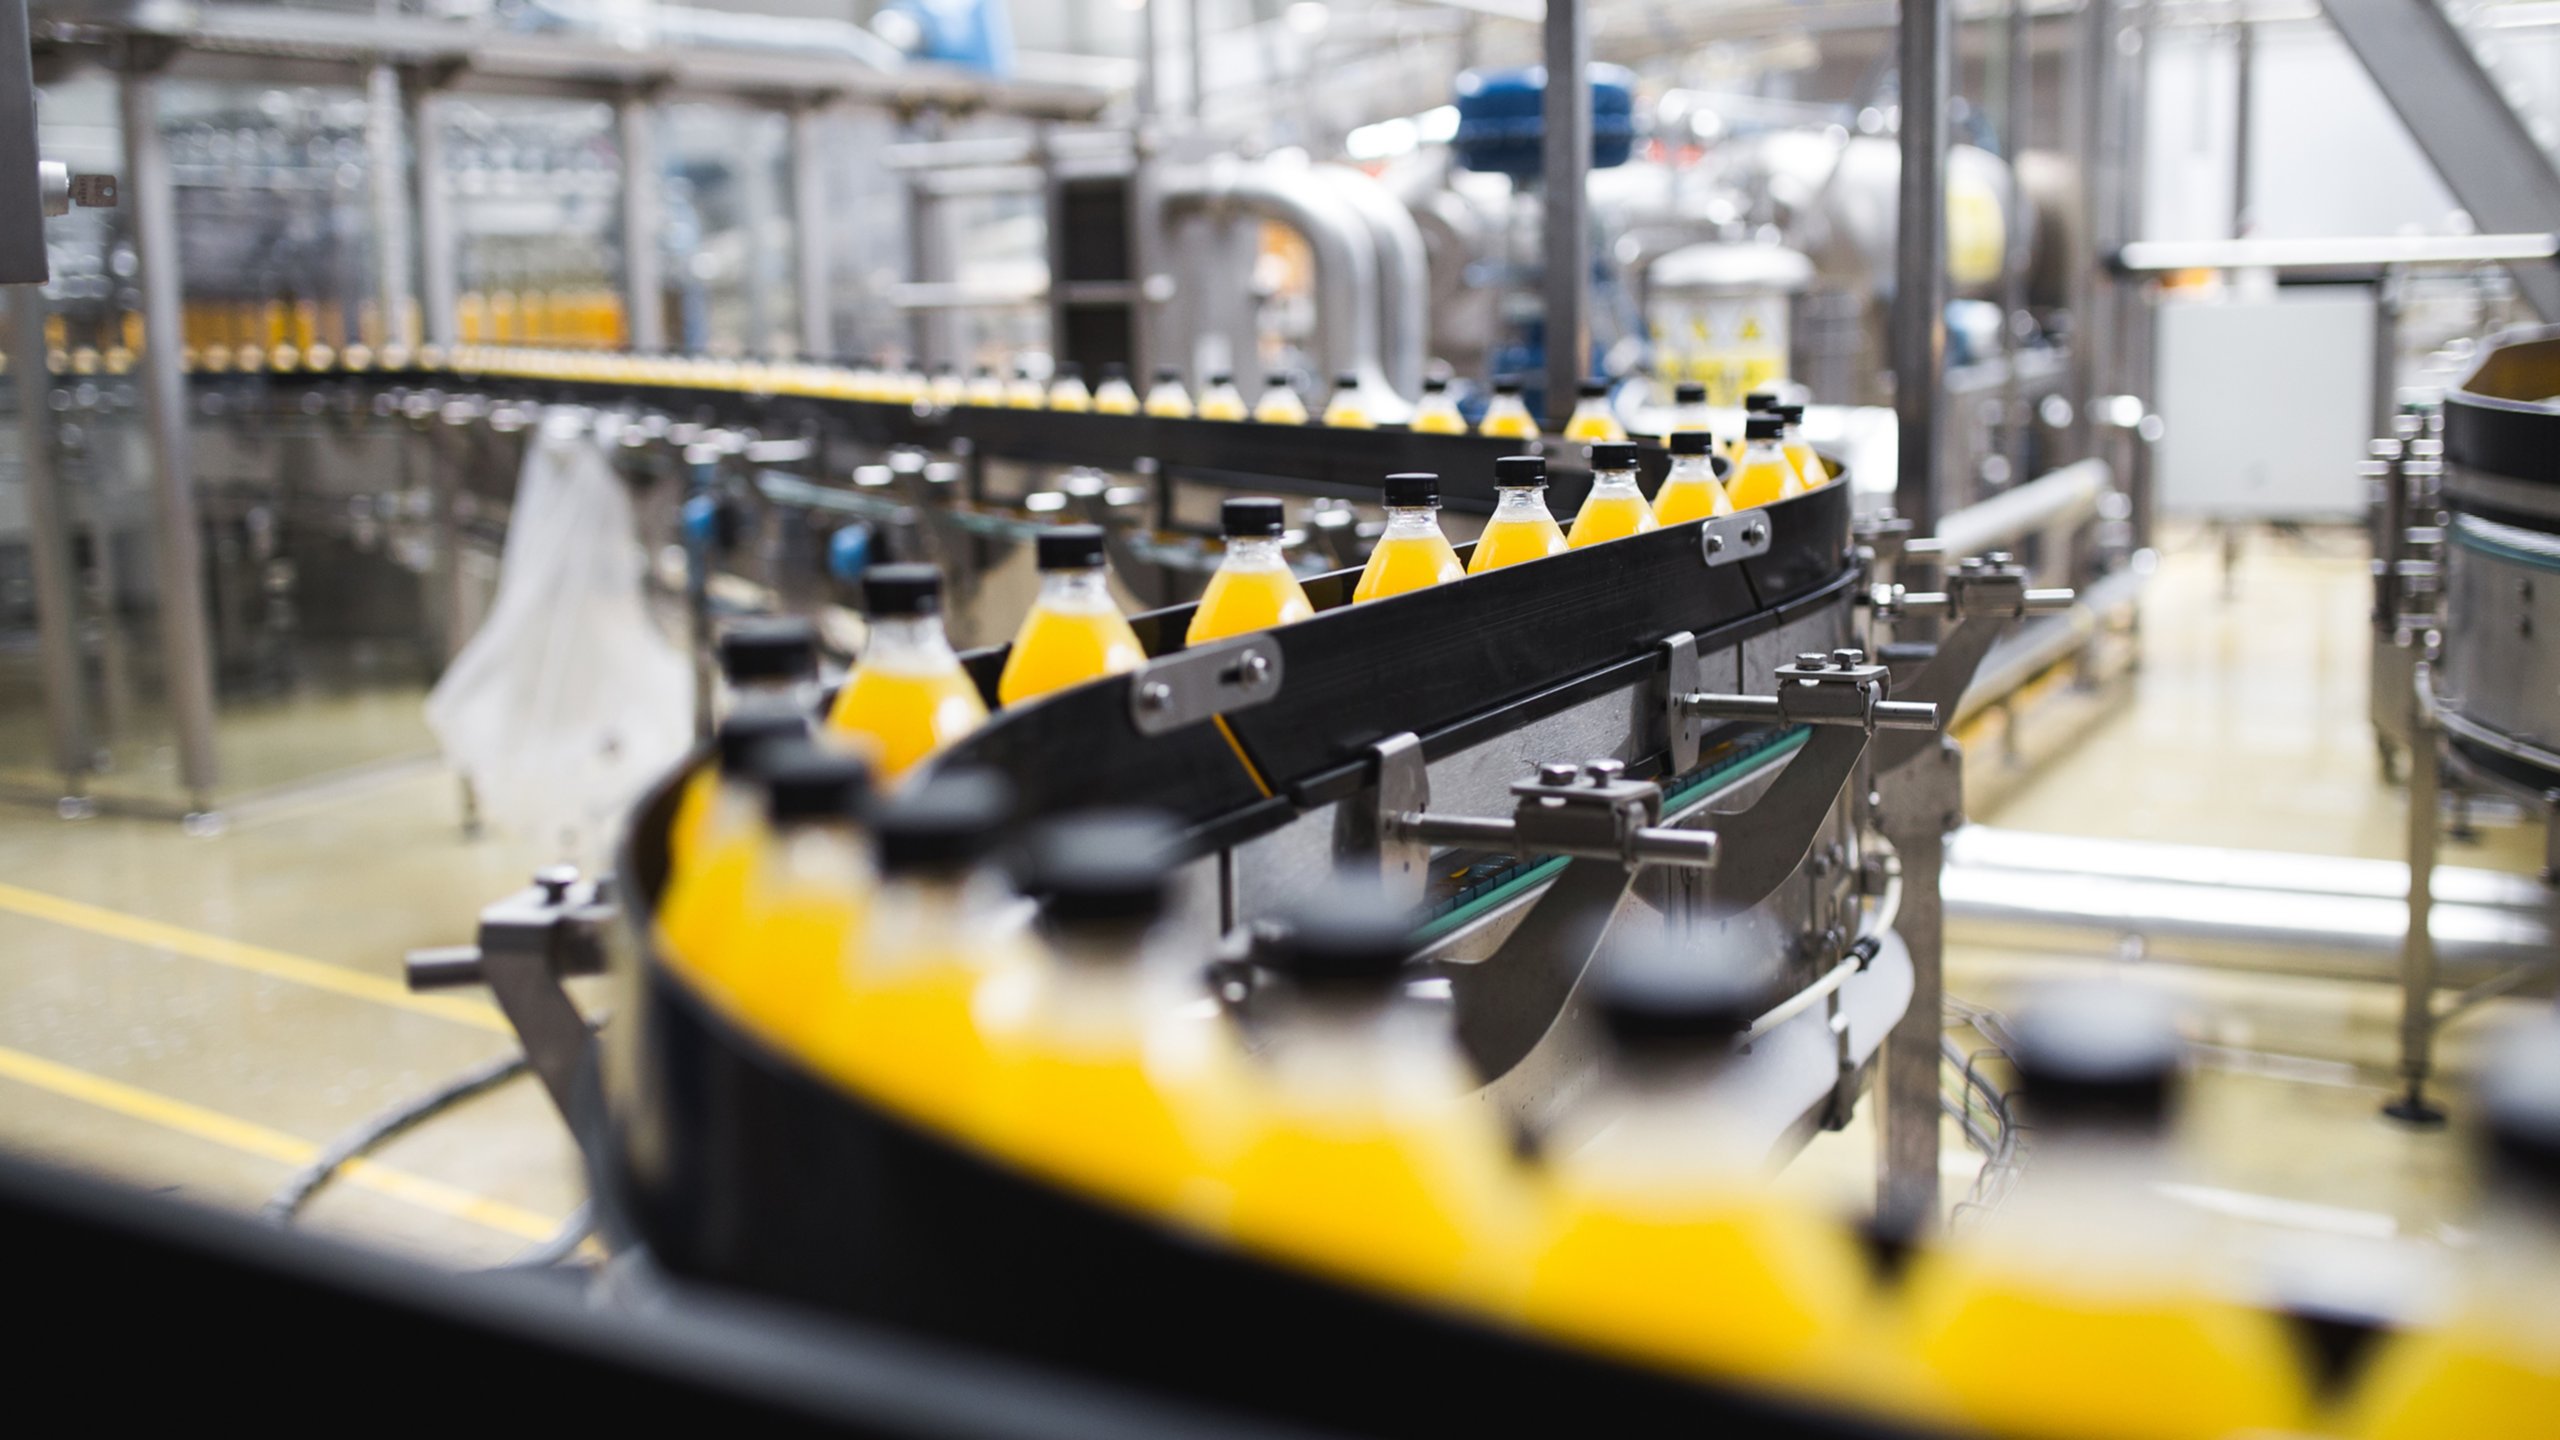 Clear plastic sports drink bottles move down a bottling line after being filled and capped in bottling facility.